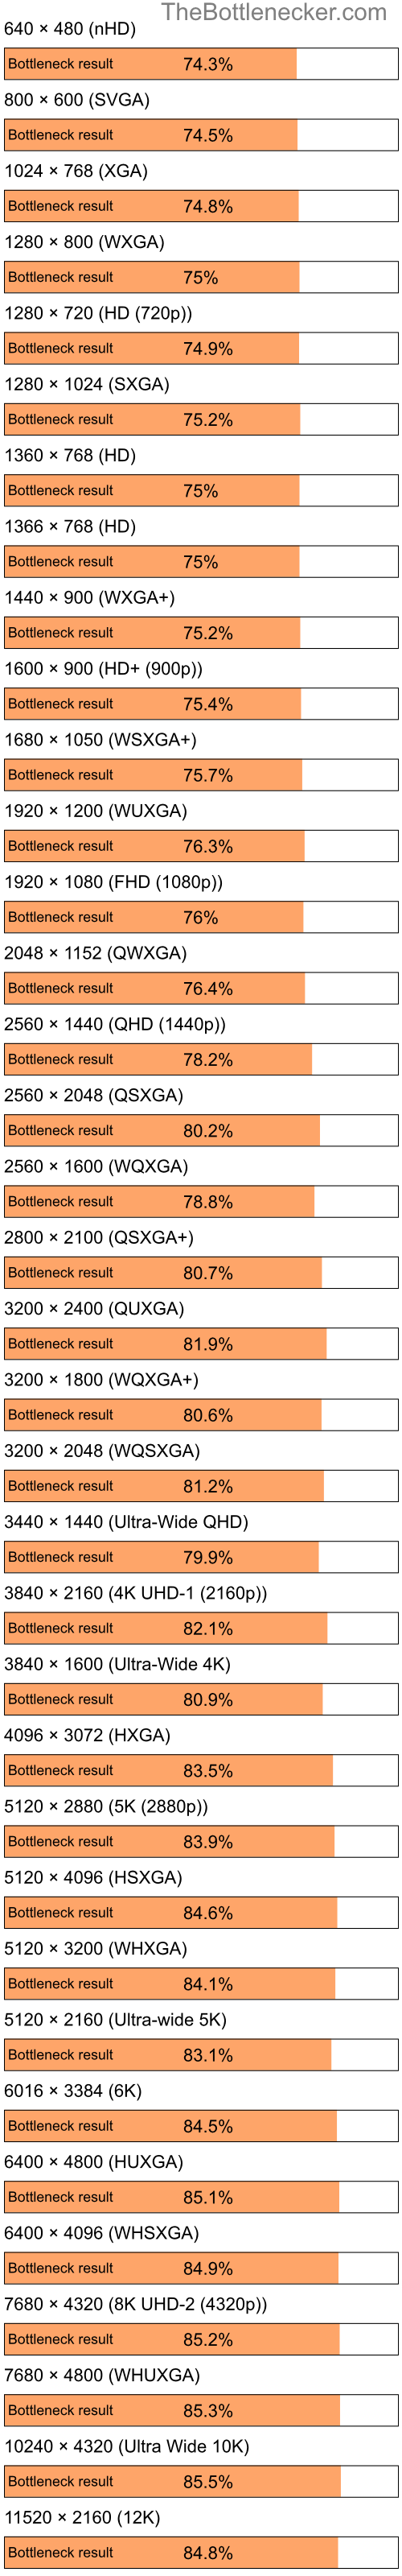 Bottleneck results by resolution for Intel Celeron and NVIDIA GeForce 8400M G in Graphic Card Intense Tasks